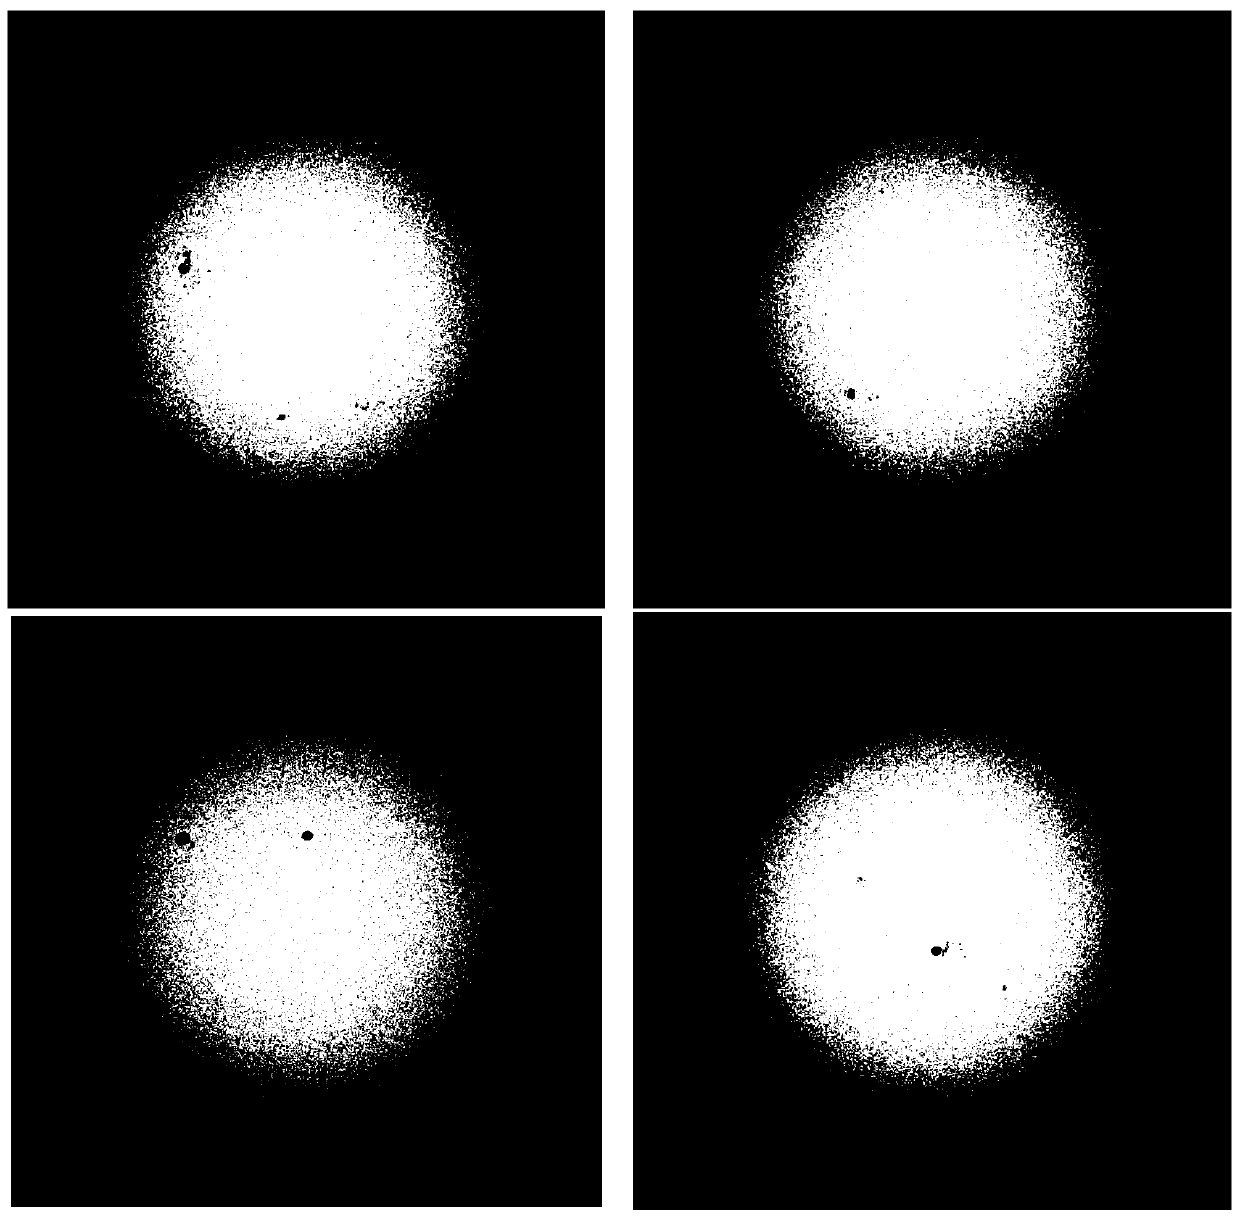 a solar image registration method based on normalized cross-correlation and SIFT